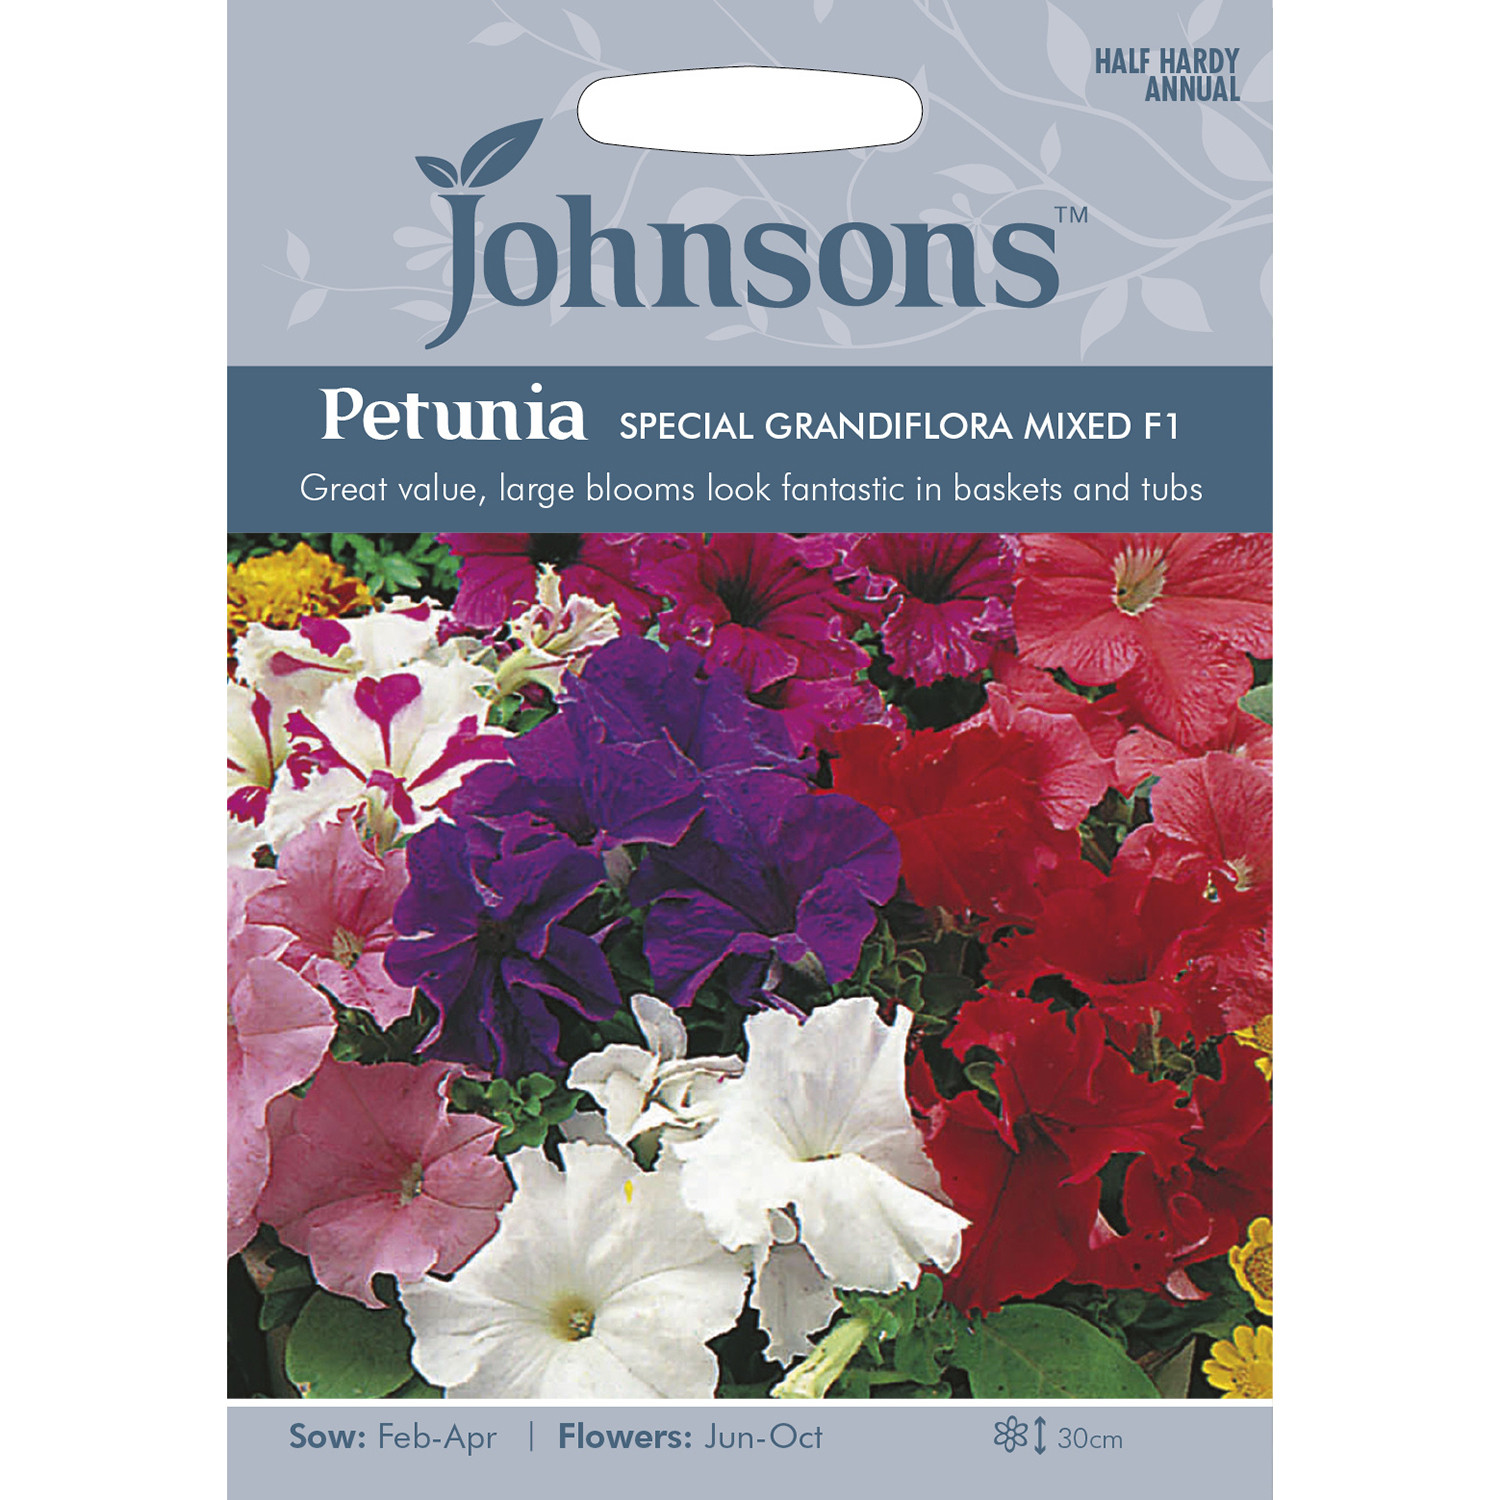 Johnsons Petunia Special Grandiflora Mixed F1 Flower Seeds Image 2